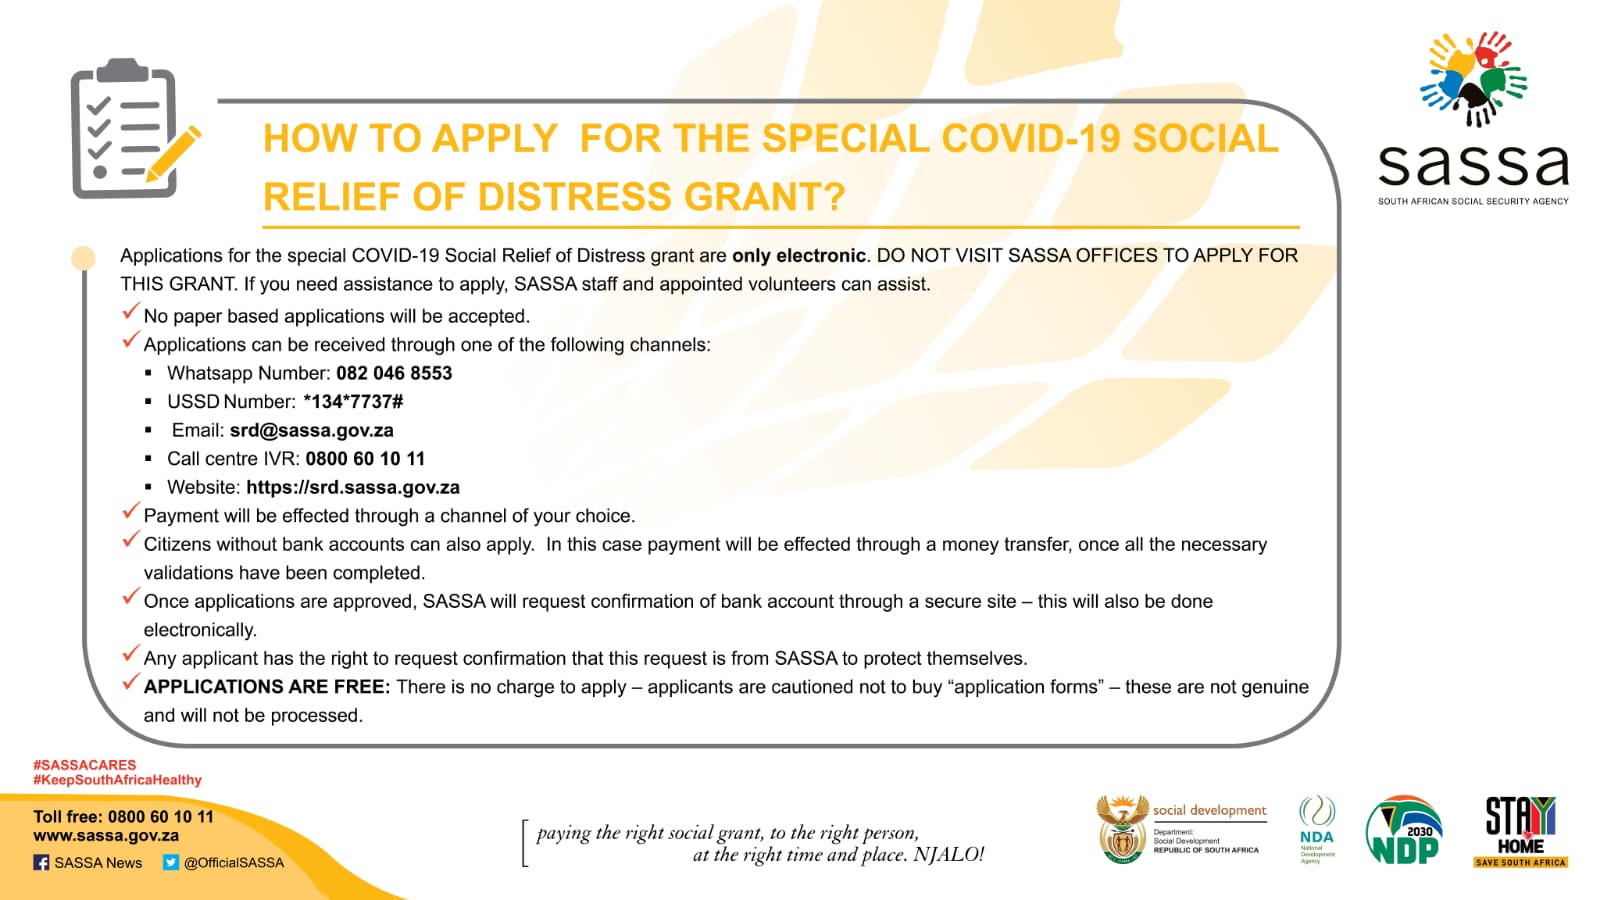 How do I apply for the Social Relief of Distress (SRD) grant?